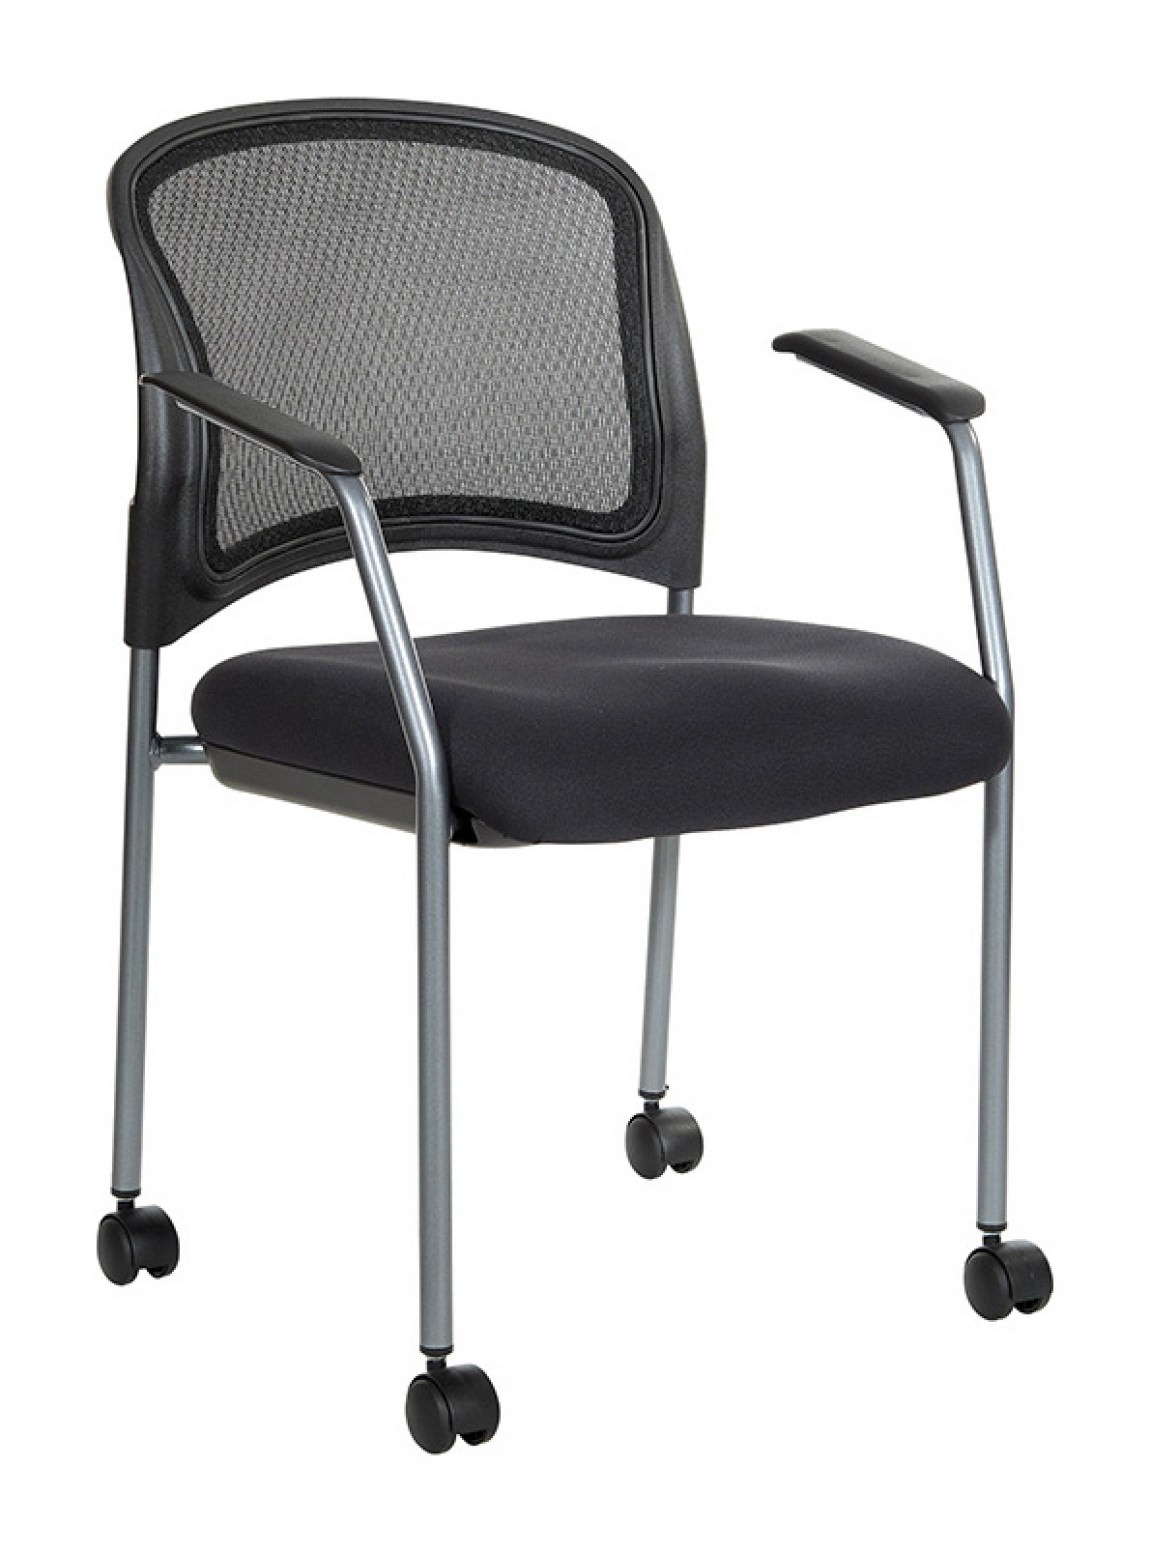 Black Rolling Mesh Back Stacking Chair | Pro Line II by Office Star ...